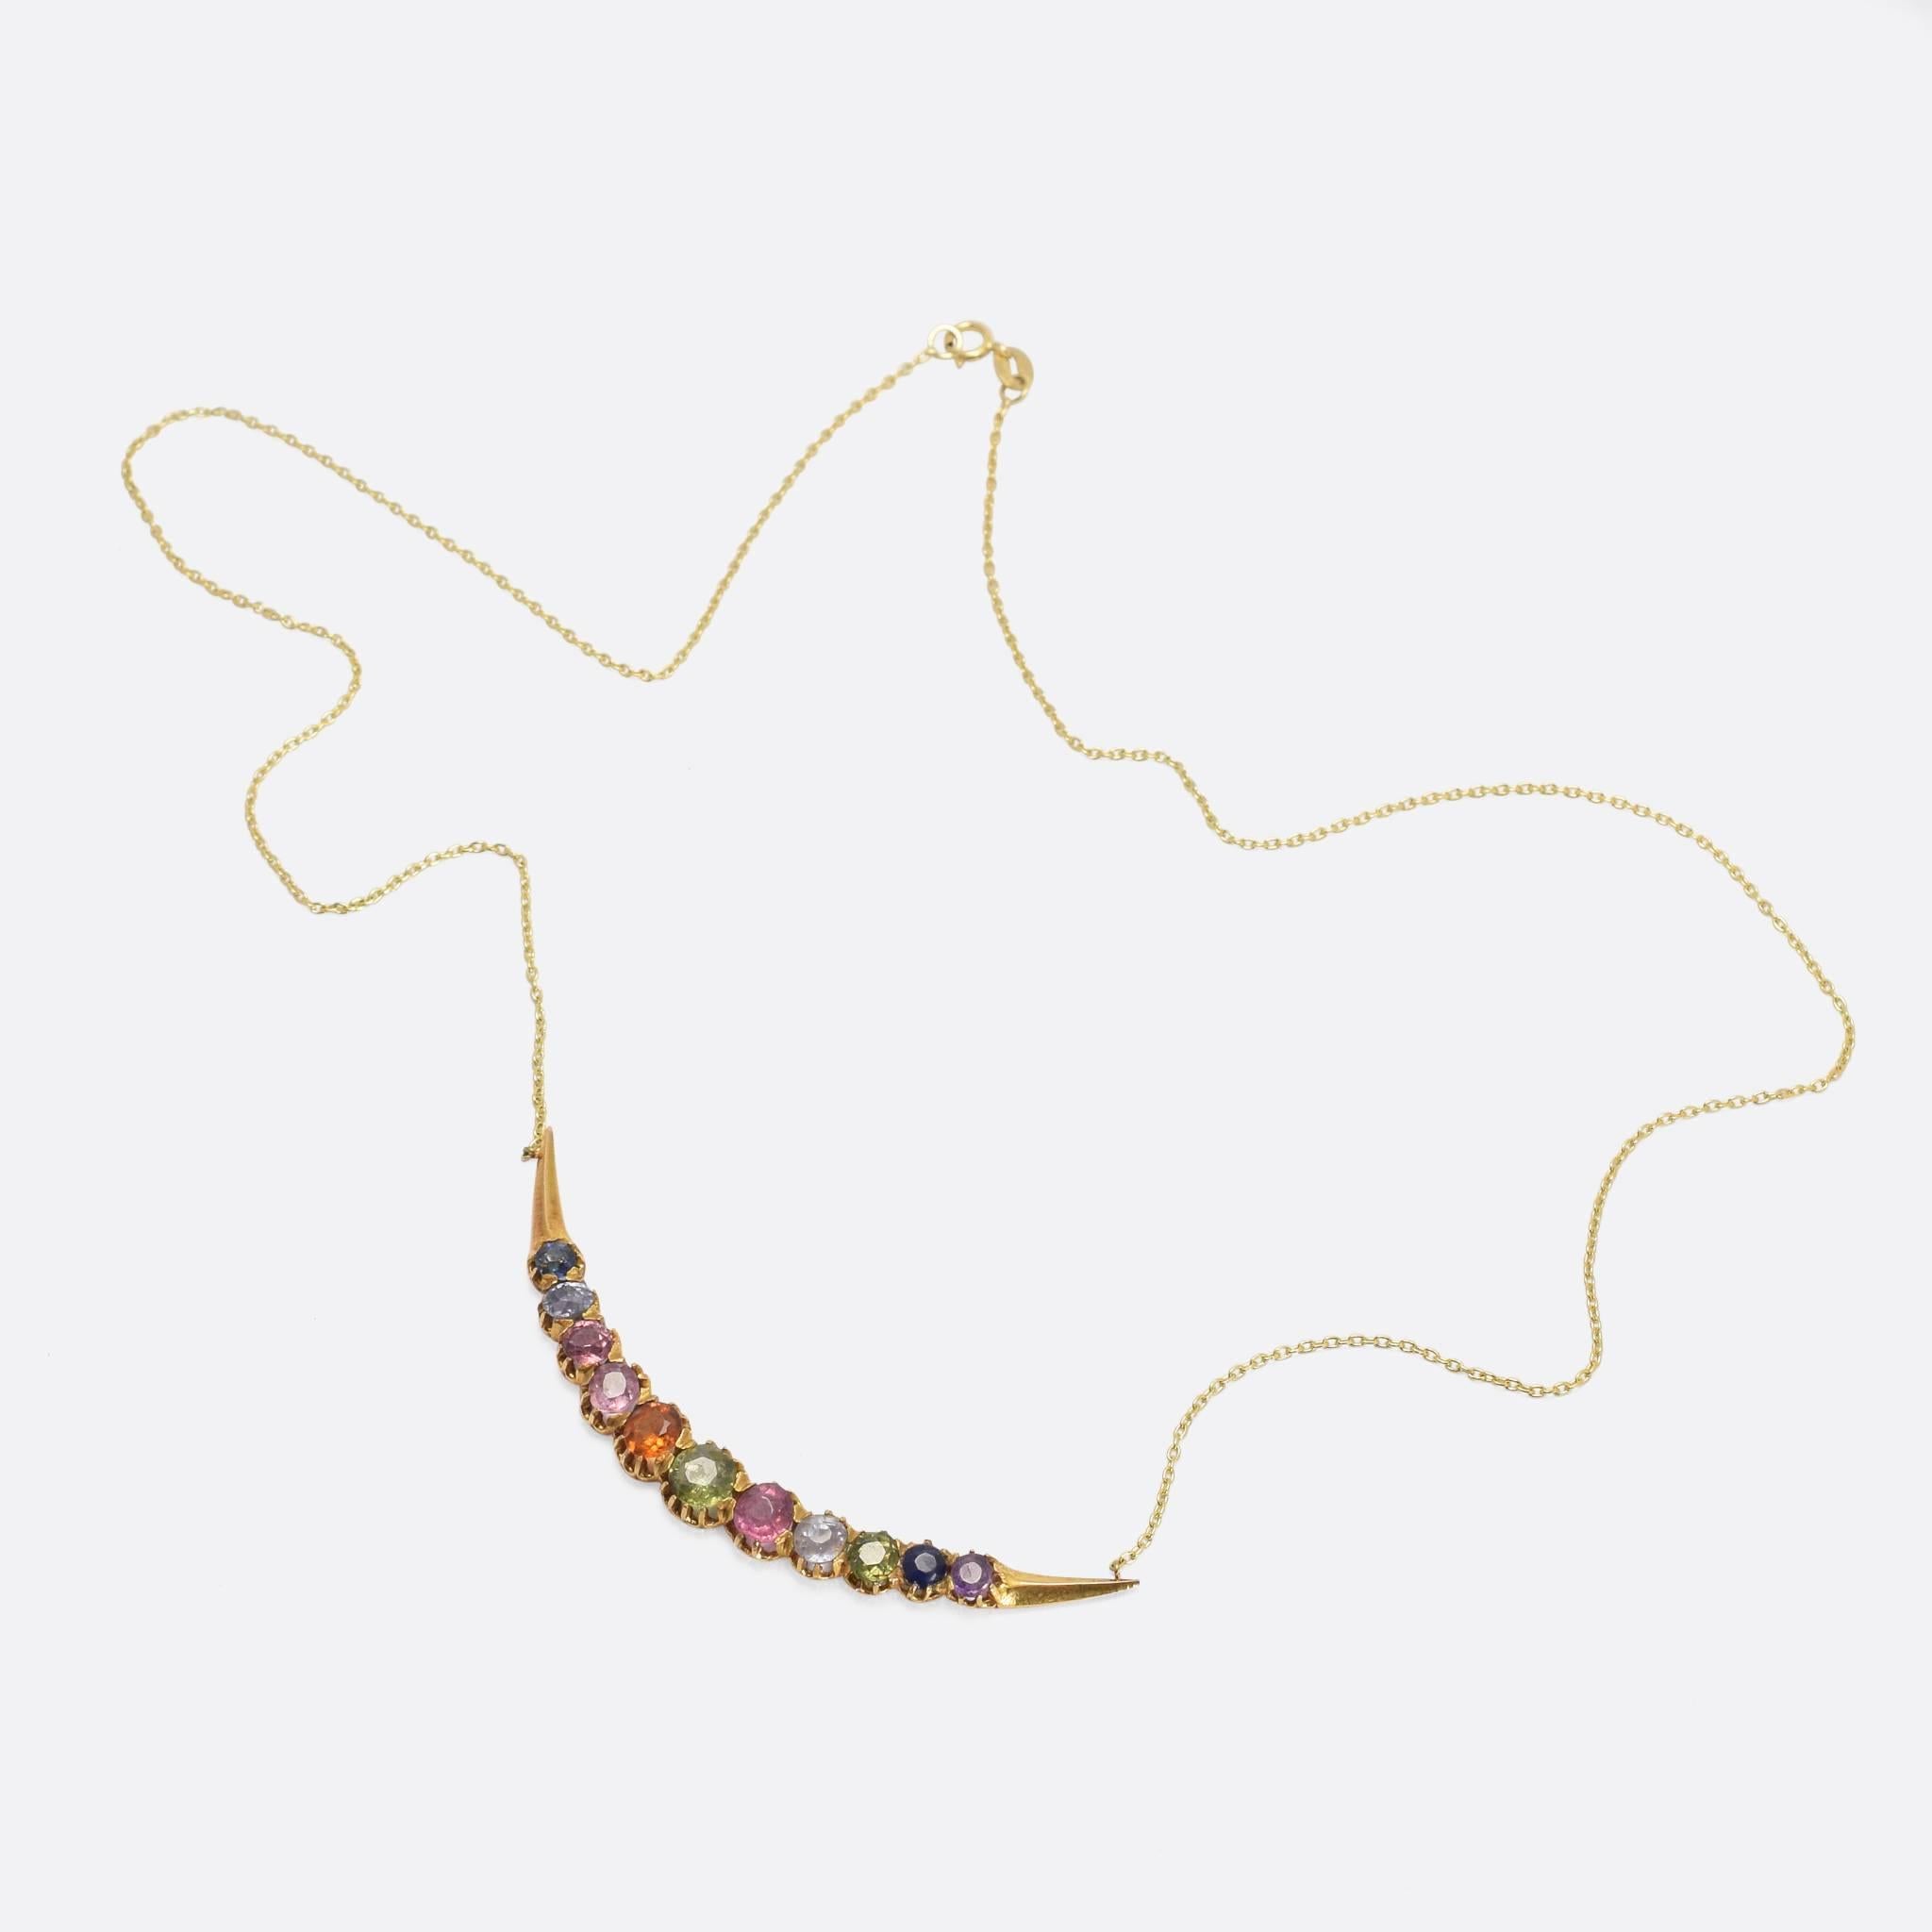 A gorgeous Victorian harlequin crescent necklace, set with a rainbow of coloured gemstones in scalloped claw settings. The stones include a central demantoid garnet, flanked by: blue and pink topaz, hessanite garnet, blue and pink sapphires, and